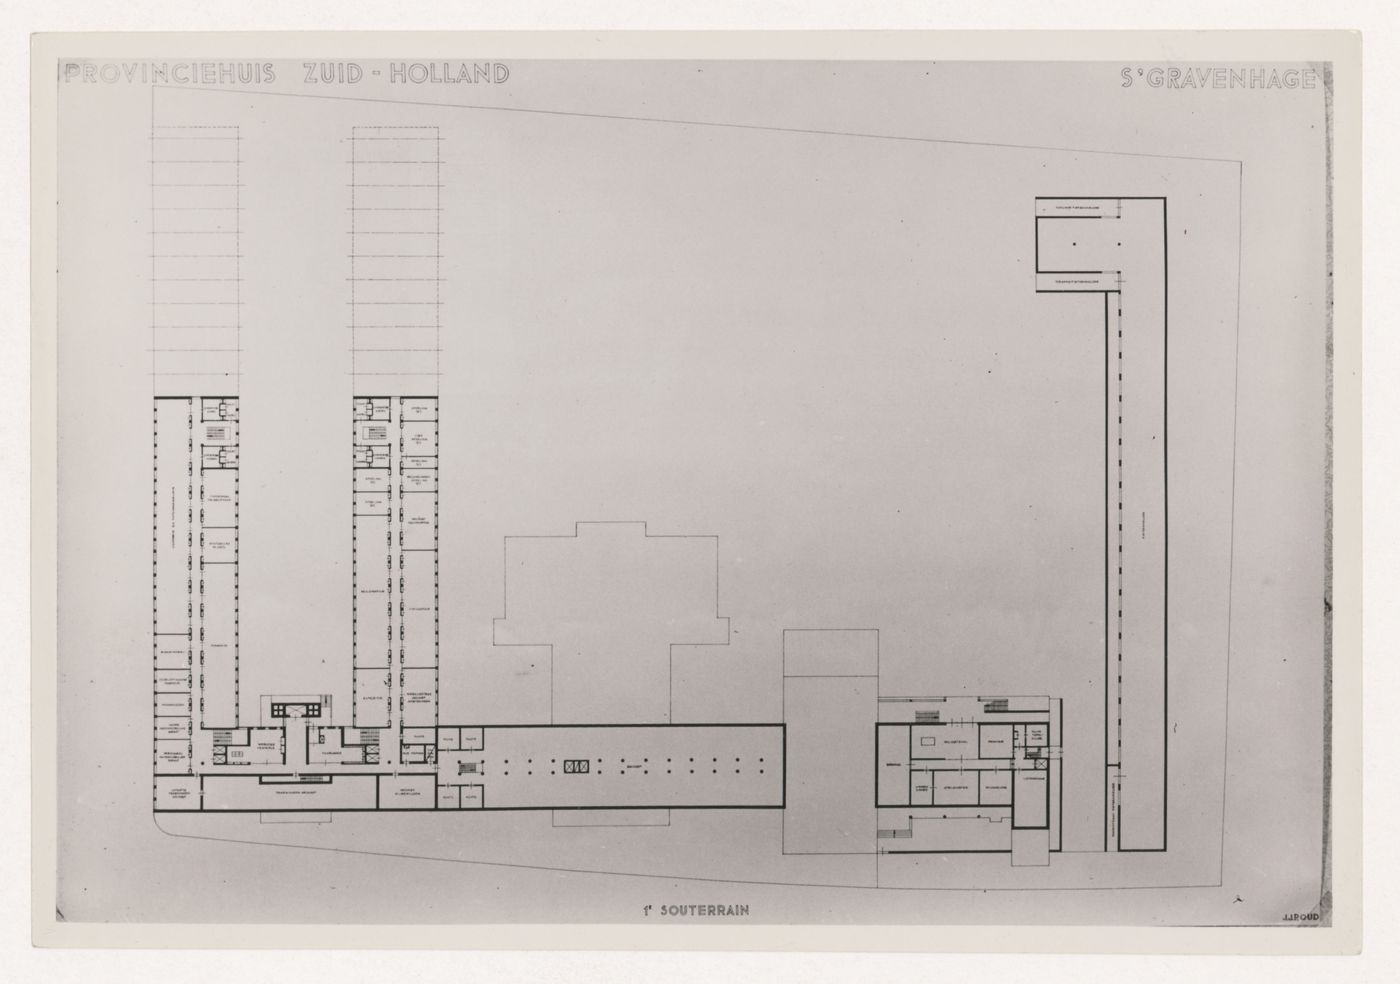 Photograph of a basement plan for the South Holland Local Government Headquarters, The Hague, Netherlands